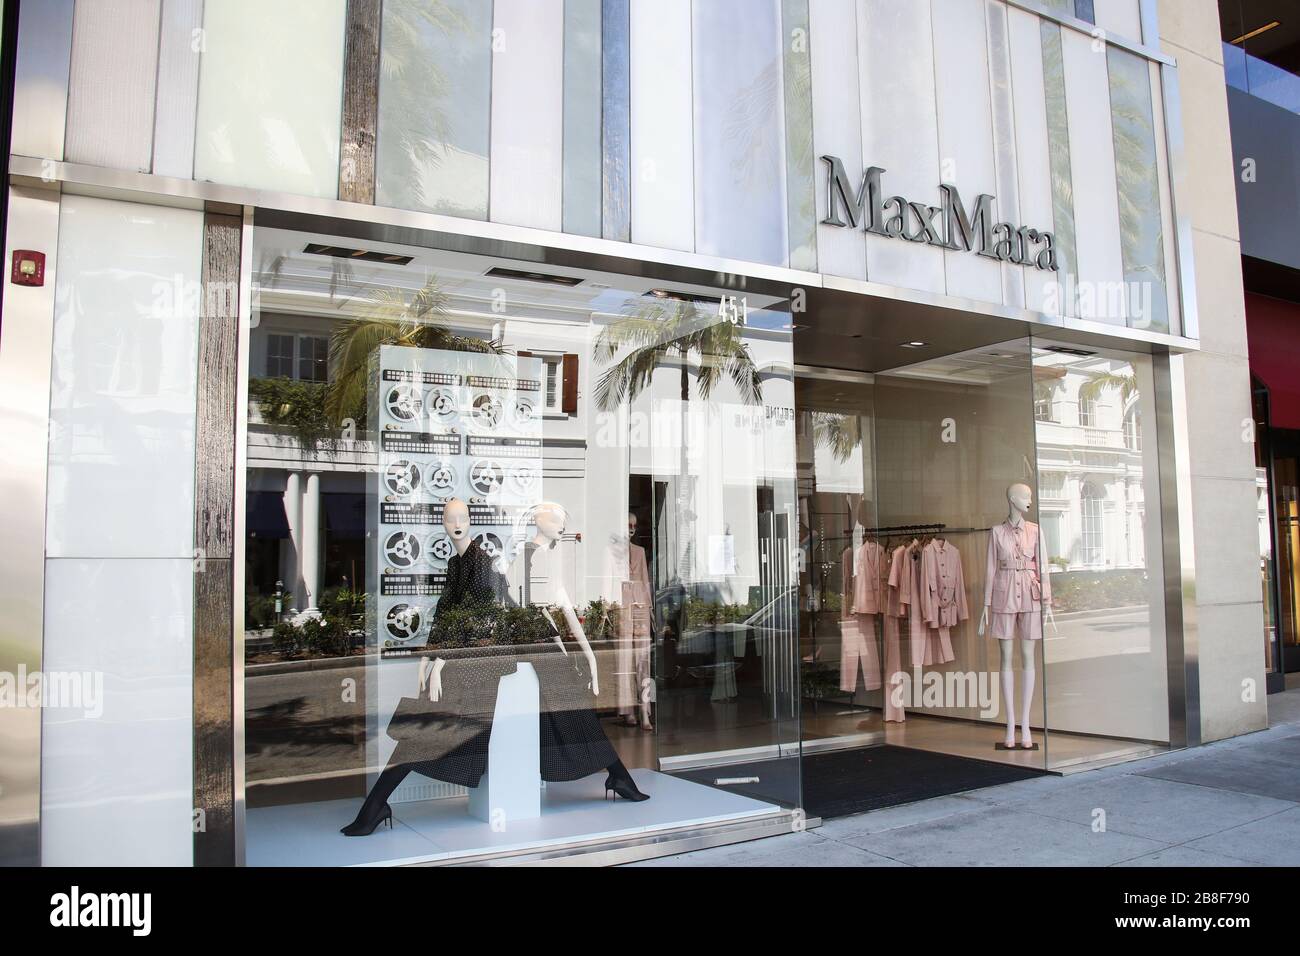 Maxmara Store High Resolution Stock Photography and Images - Alamy